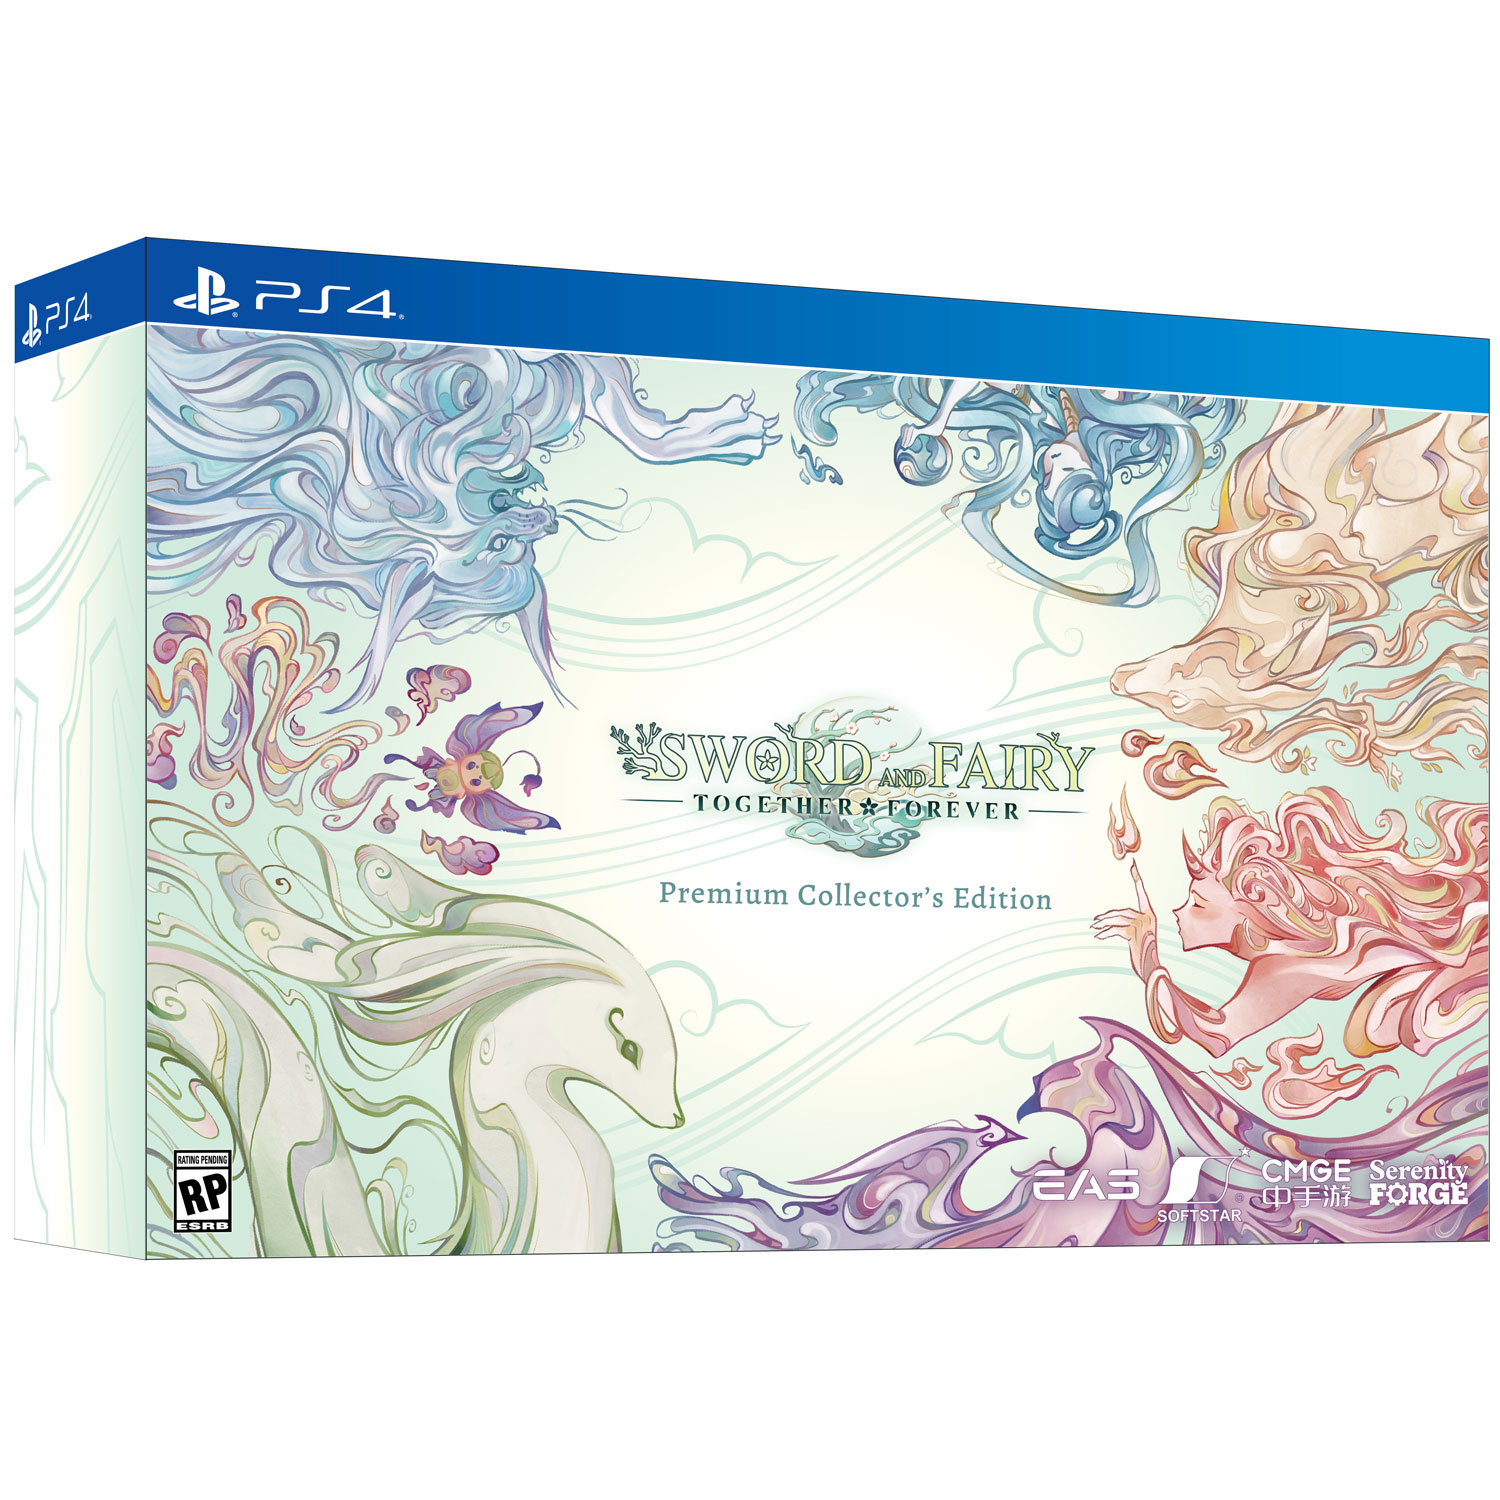 Sword and Fairy: Together Forever Premium Collector's Edition (PS4) - English